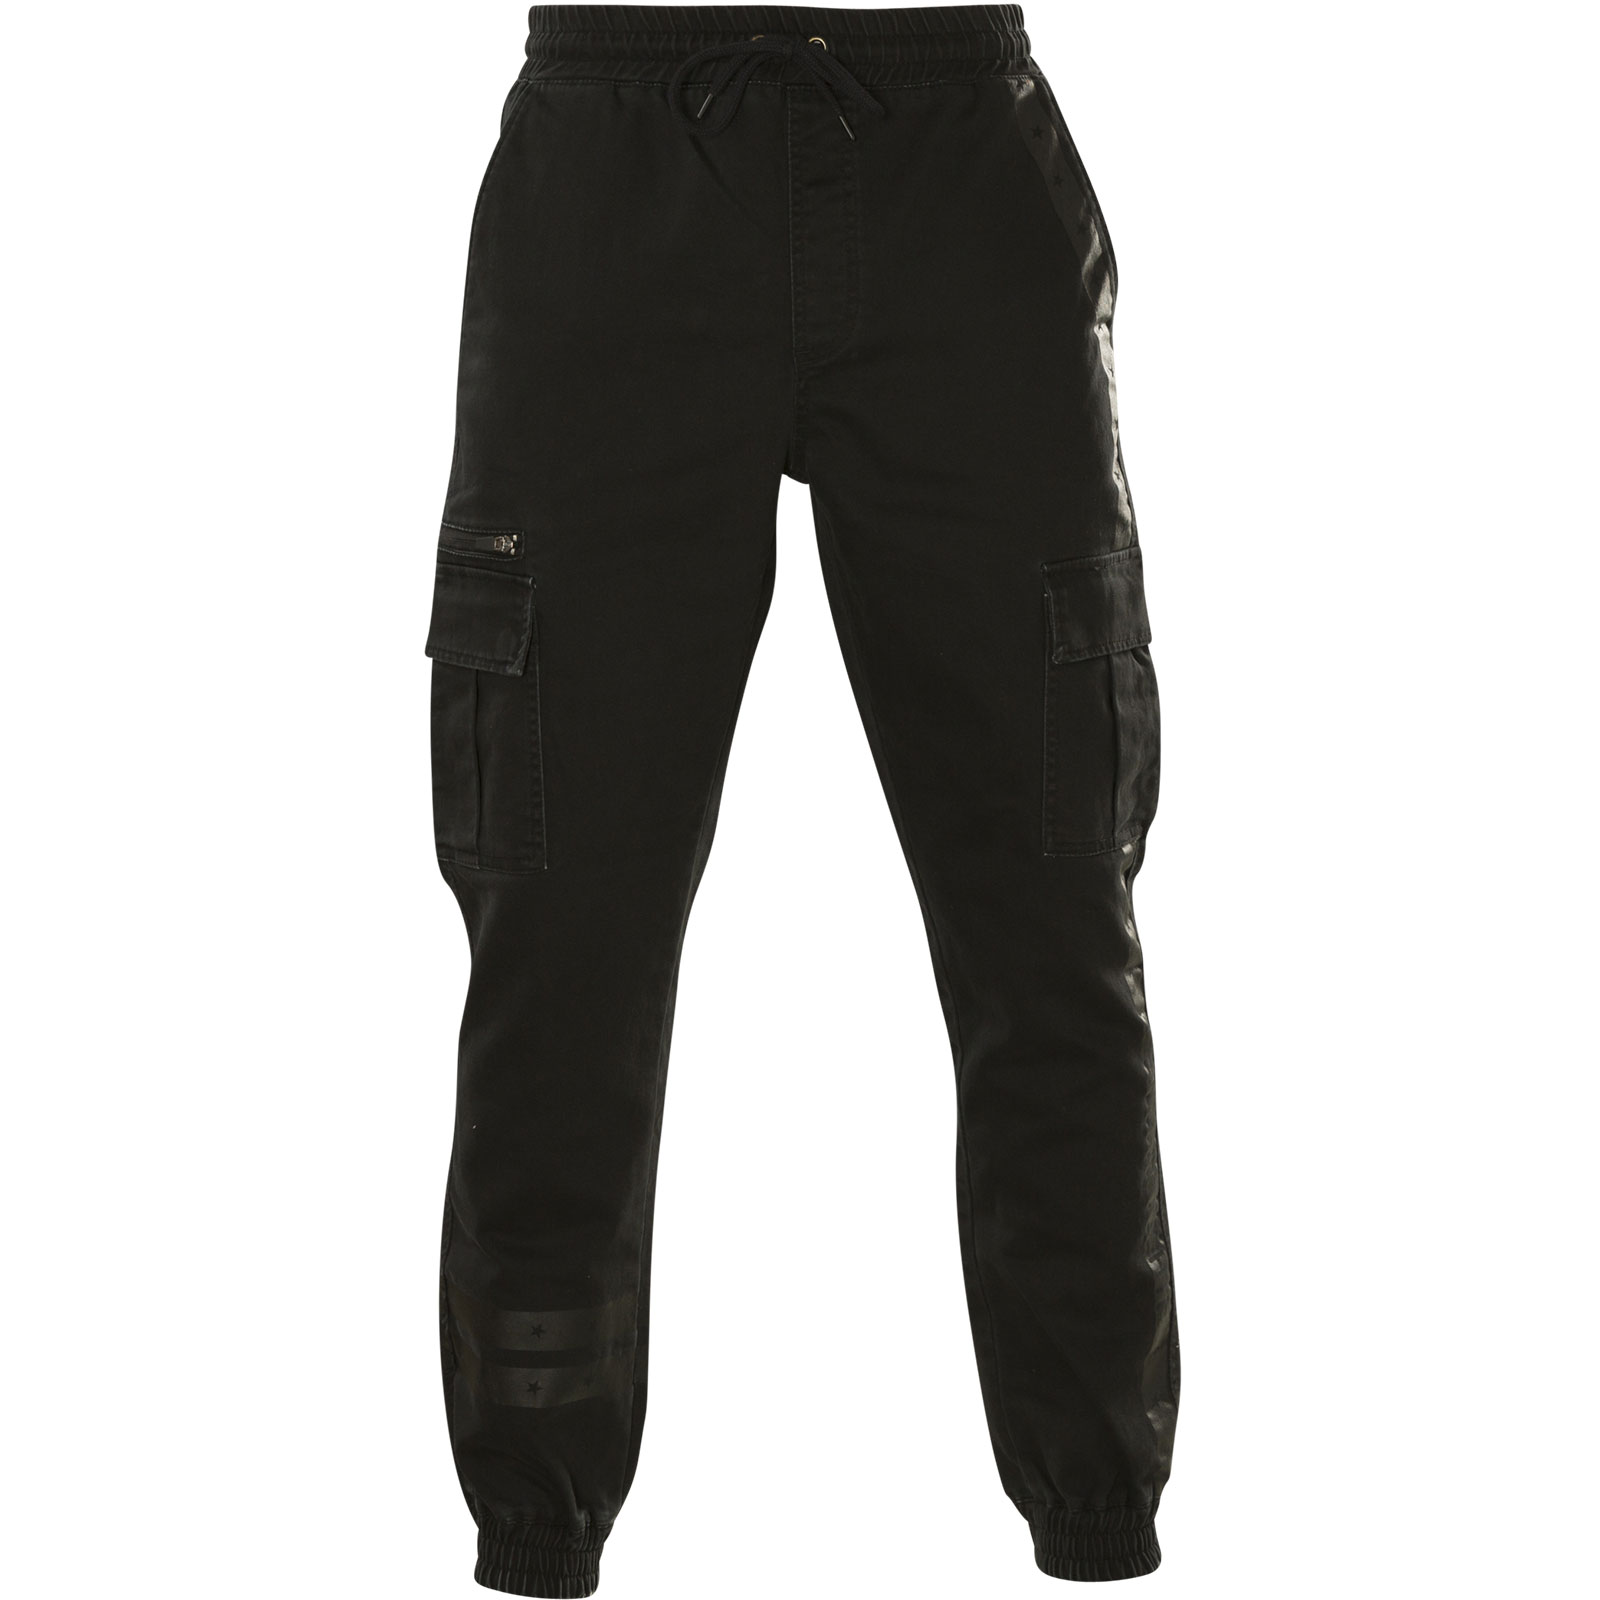 American Fighter Cargo Pant Modern Talking with black glittering prints